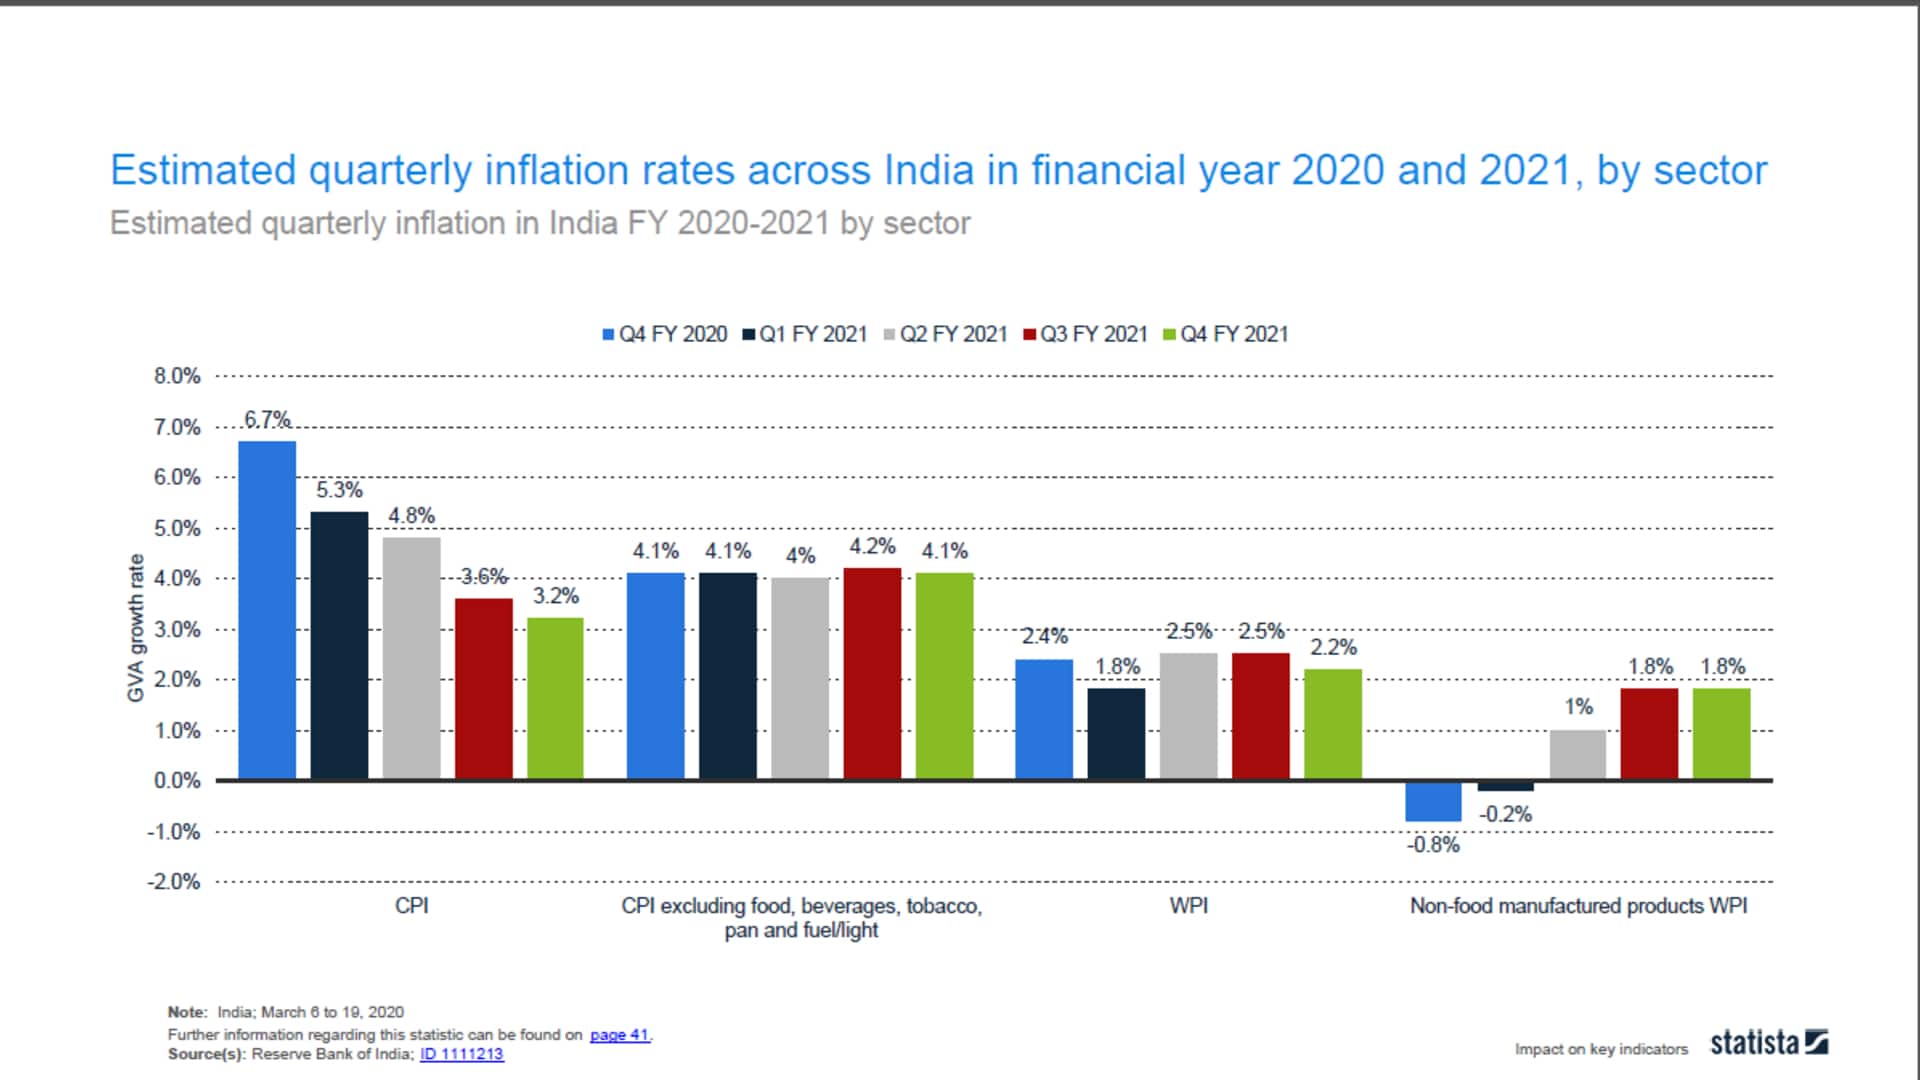 Estimated quarterly inflation rates across India in financial year 2020 and 2021, by sector: Consumer Price Indices were estimated to decline over the quarters of financial year 2021 indicating a period of deflation and a possible decrease in consumer demand. On the other hand, CPI excluding food, beverages, tobacco and fuel/light was projected to be far steadier at around four percent during the same time period. (Graph: CRISIL)